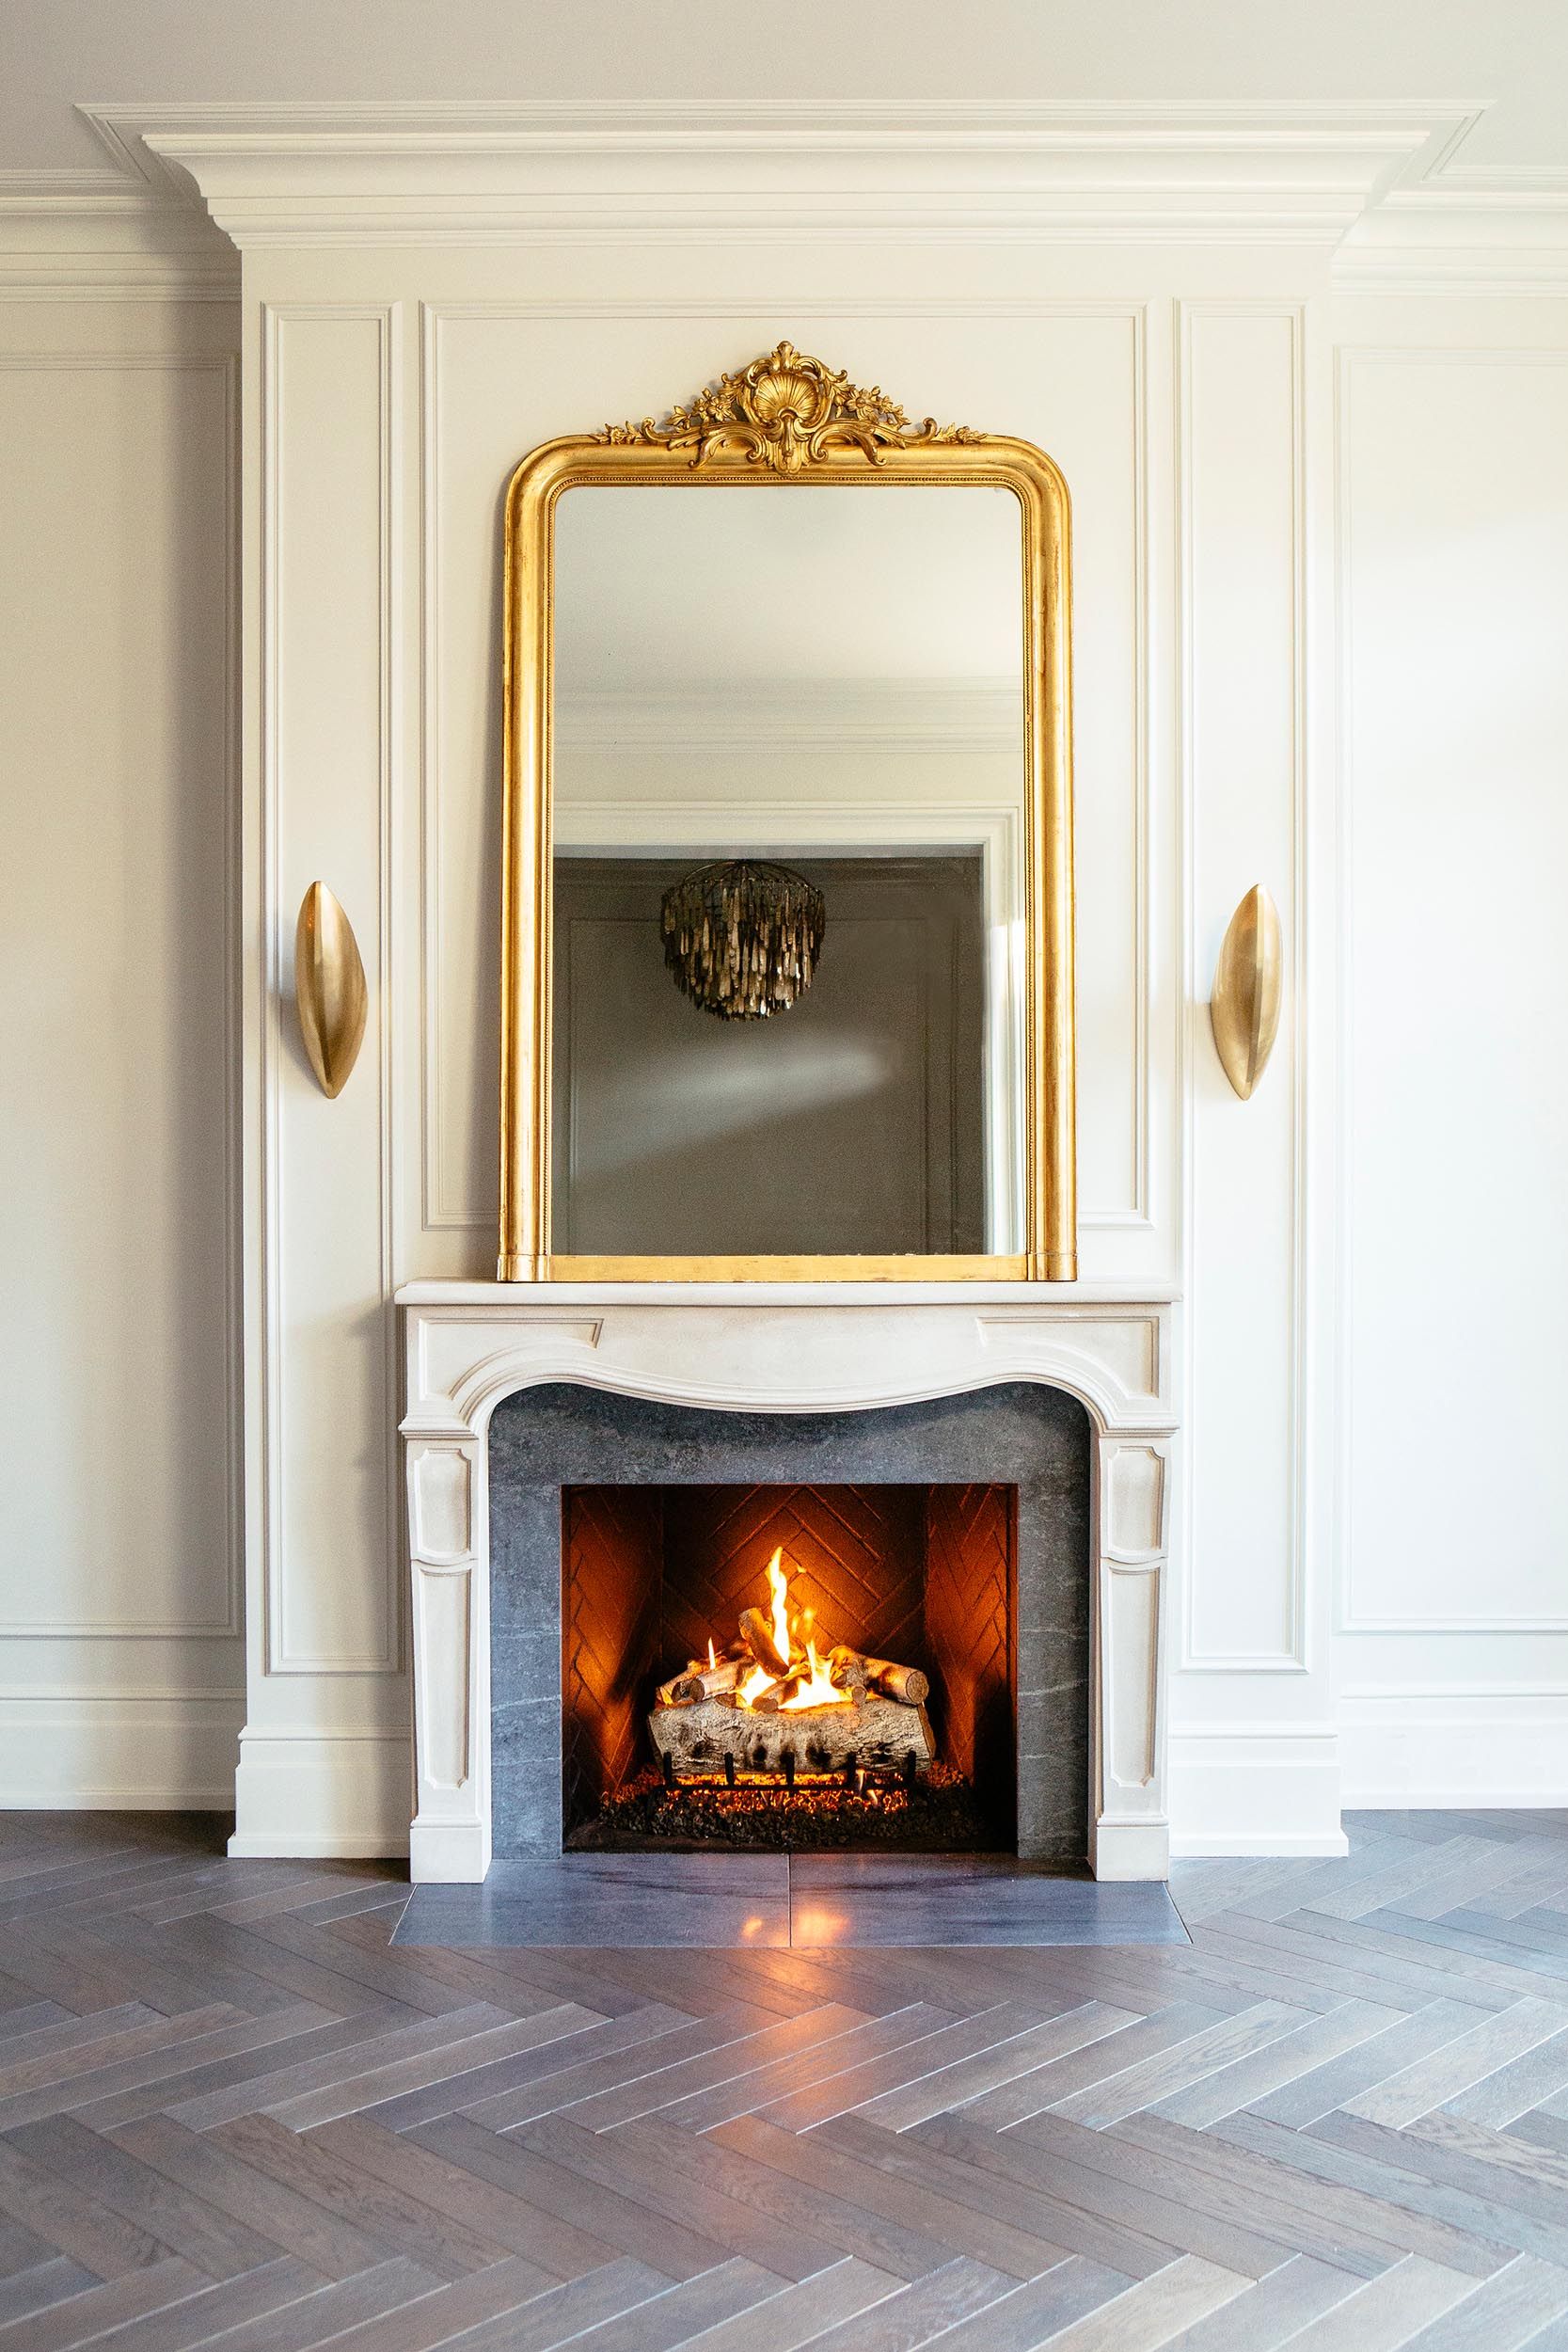 The French Fireplace: A Symbol Of Warmth And Elegance In Interior Design